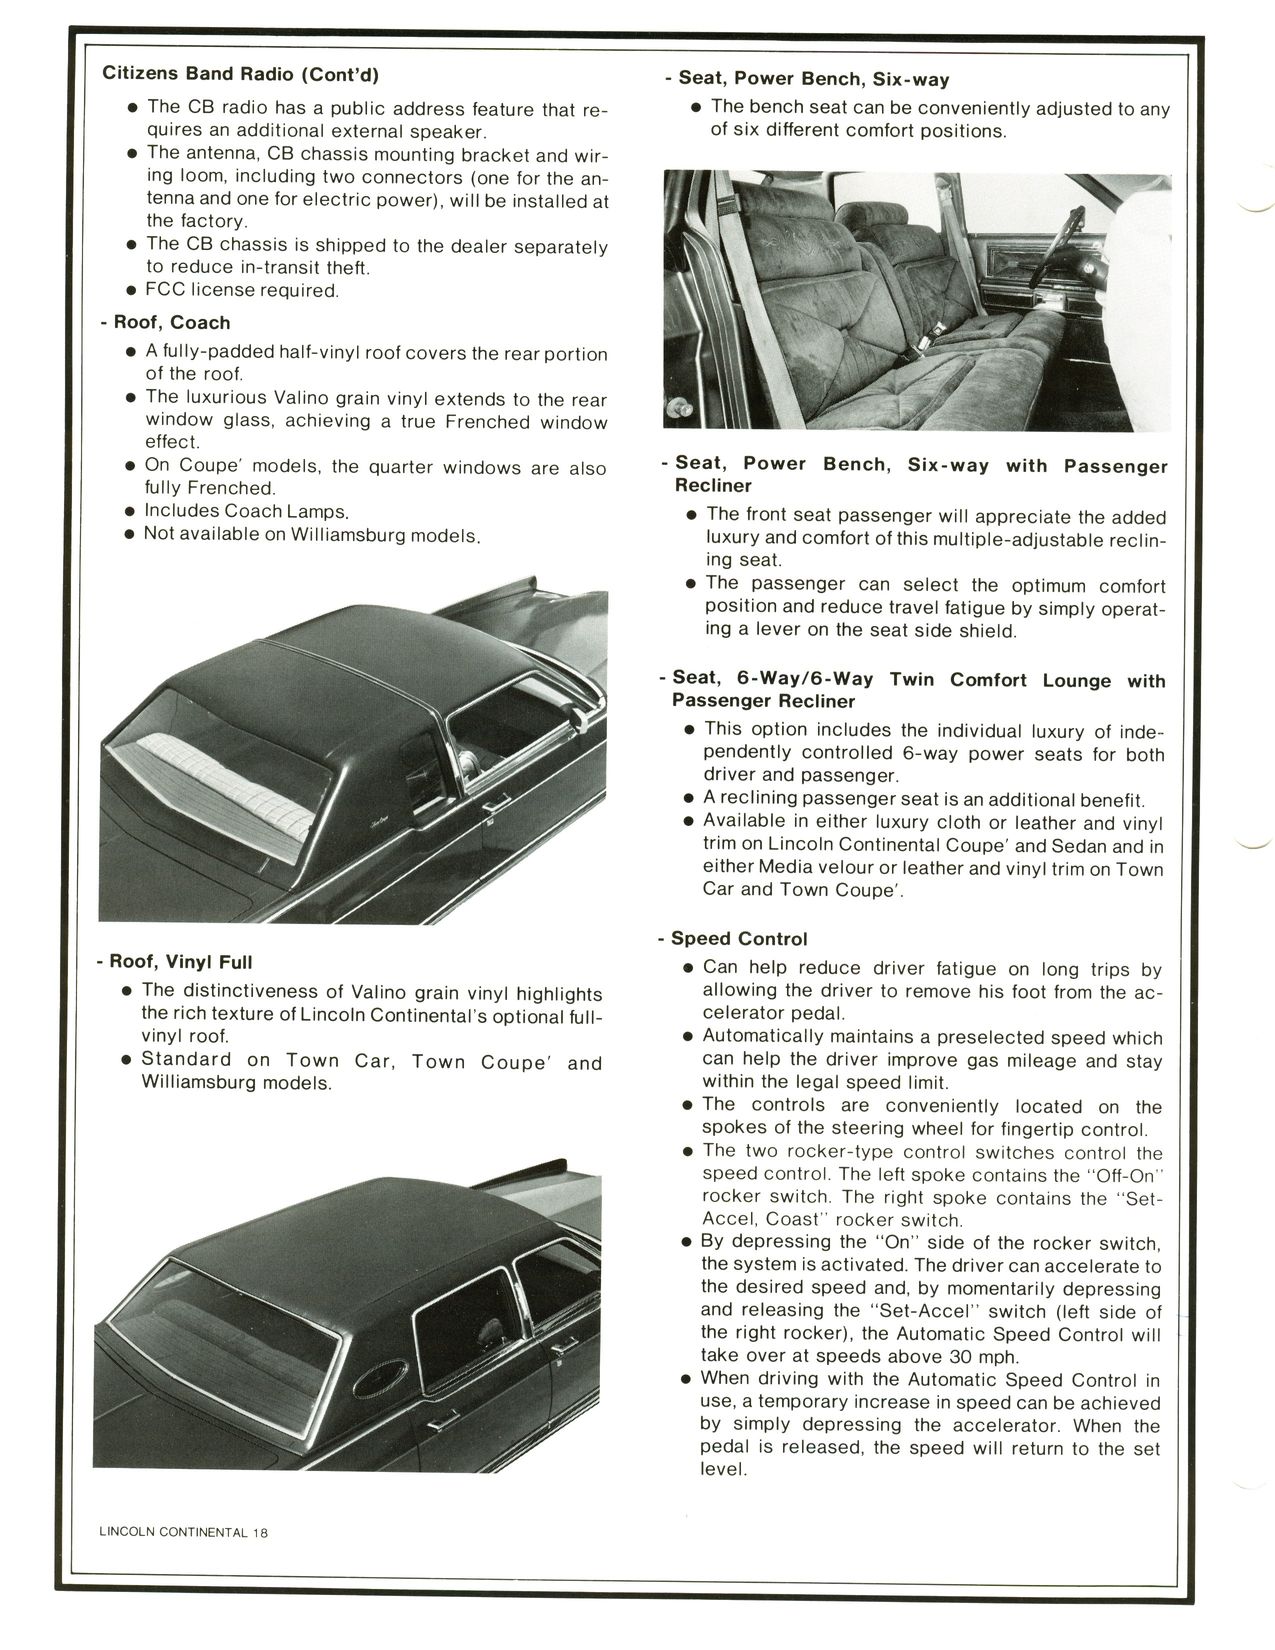 1977 Lincoln Continental Mark V Product Facts Book Page 37